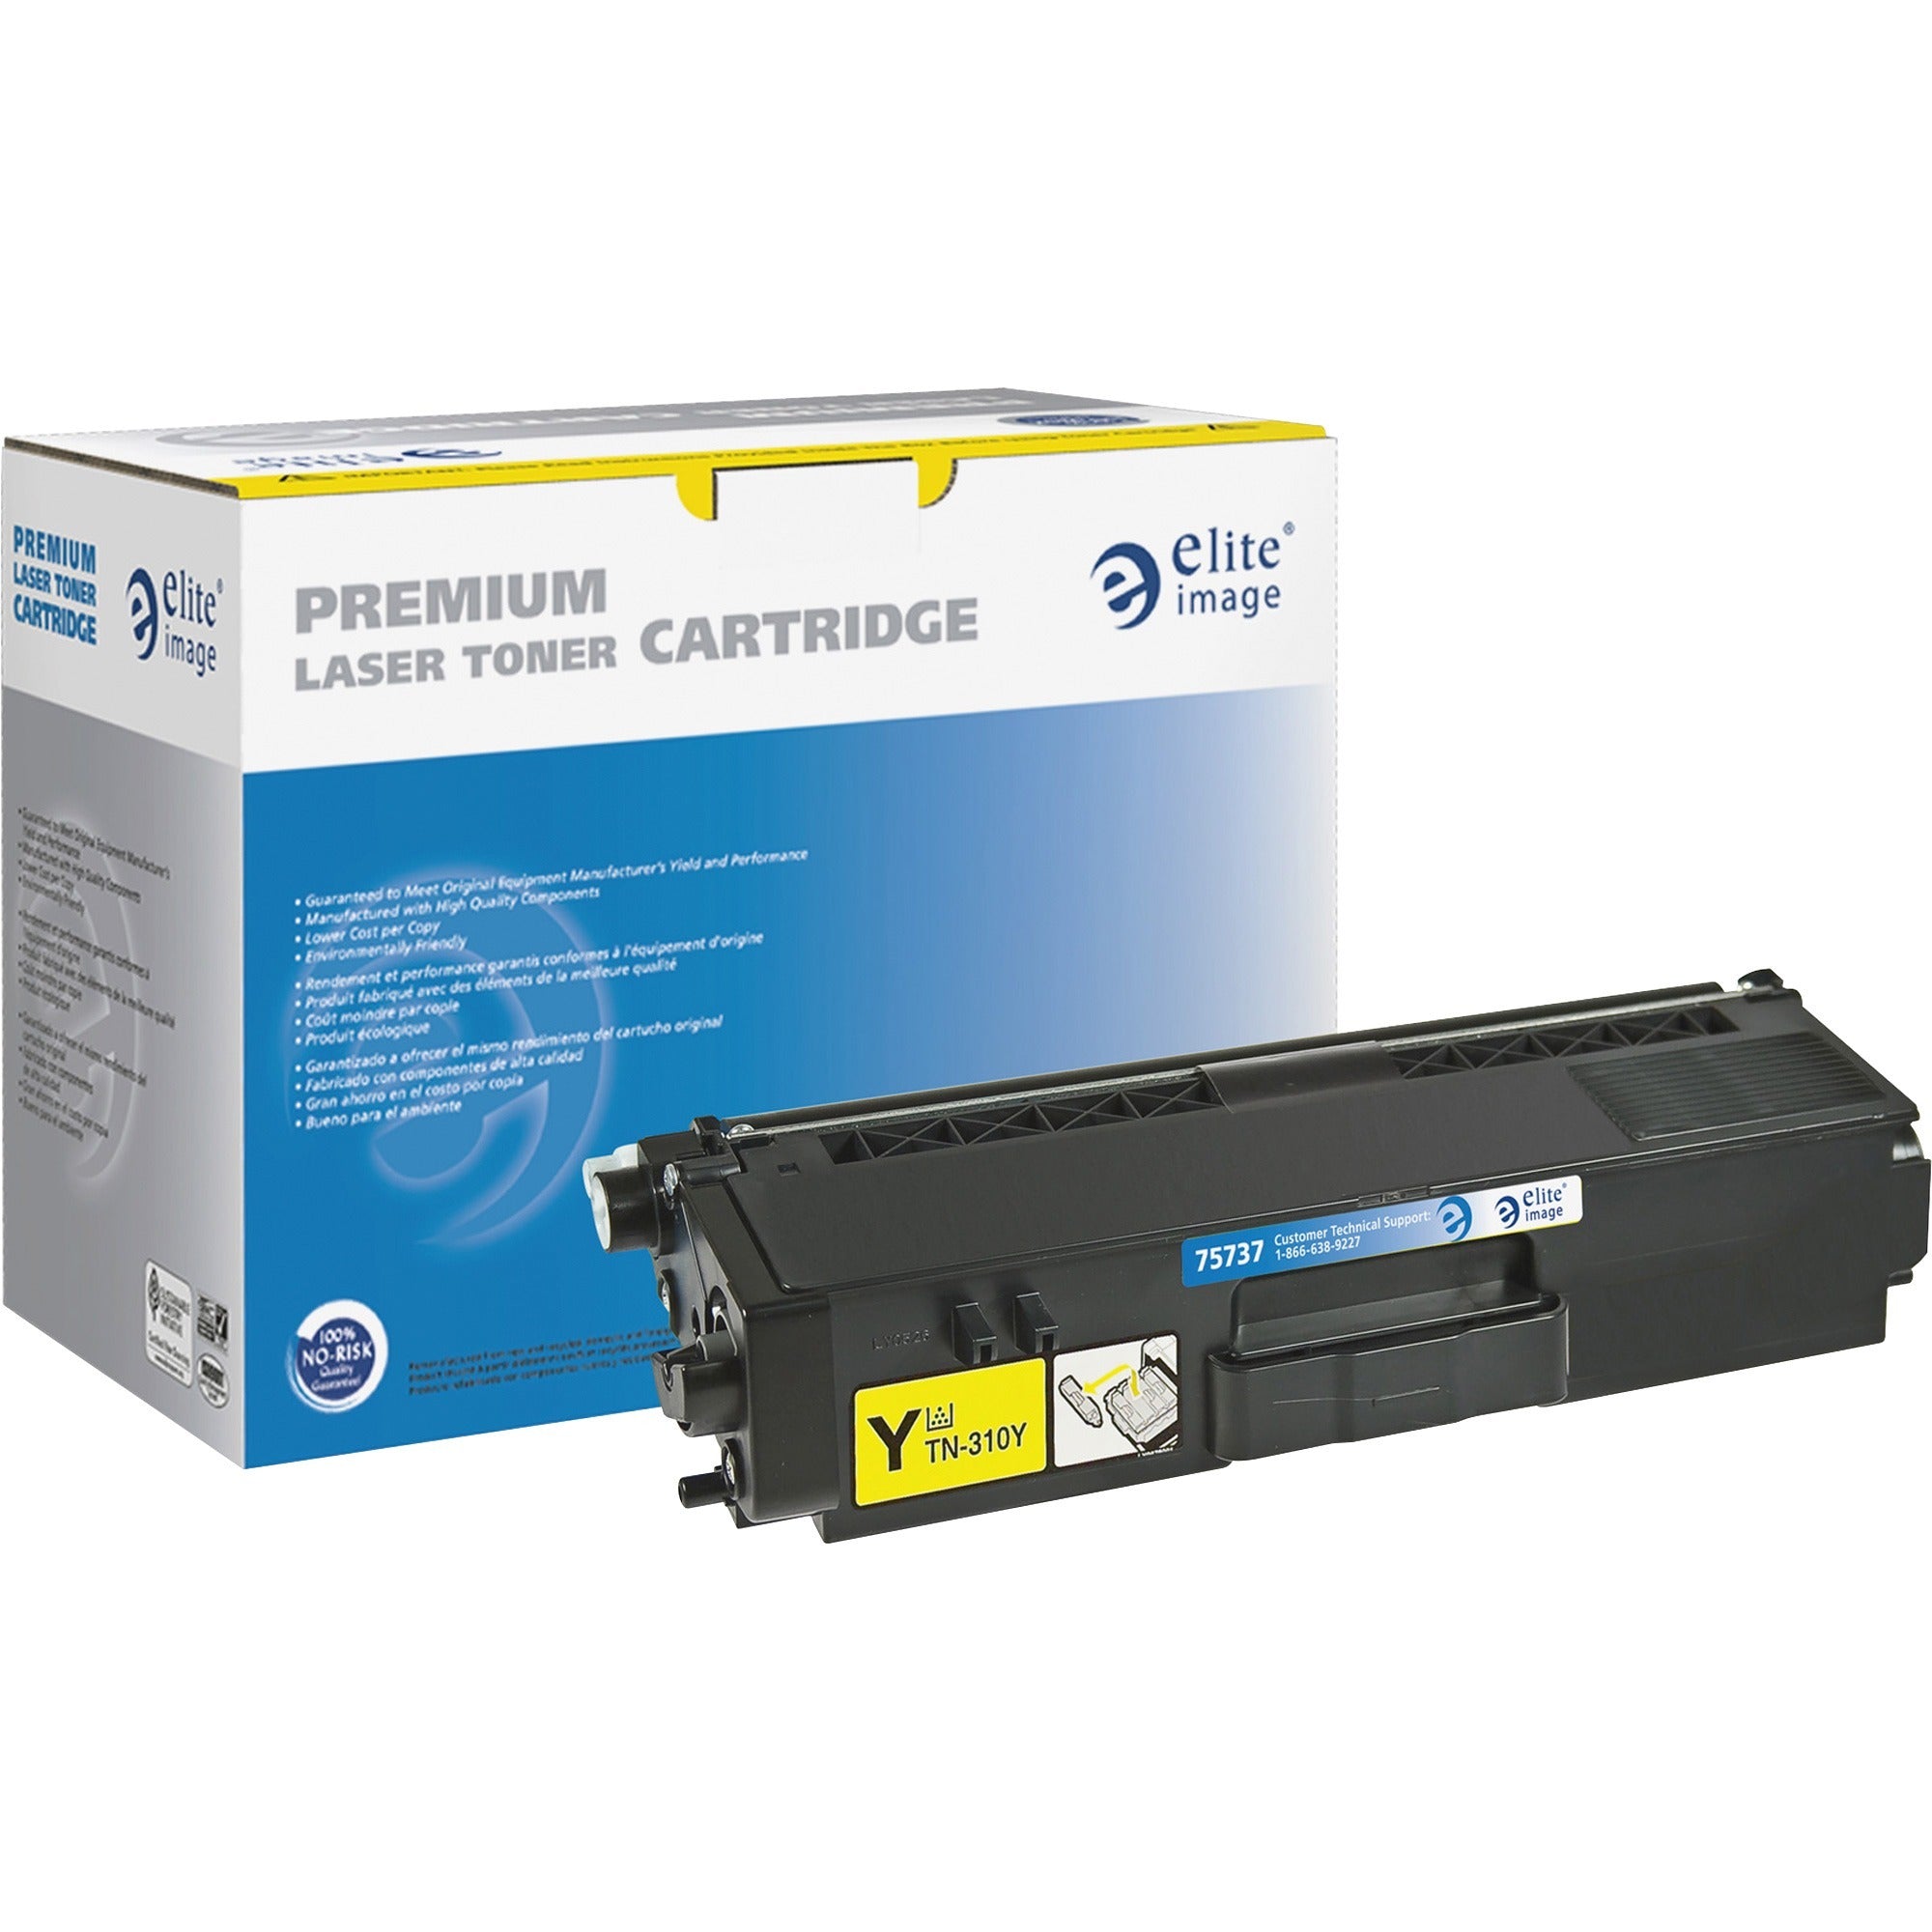 Elite Image Remanufactured High Yield Laser Toner Cartridge - Alternative for Brother TN315 - Yellow - 1 Each - 3500 Pages - 1